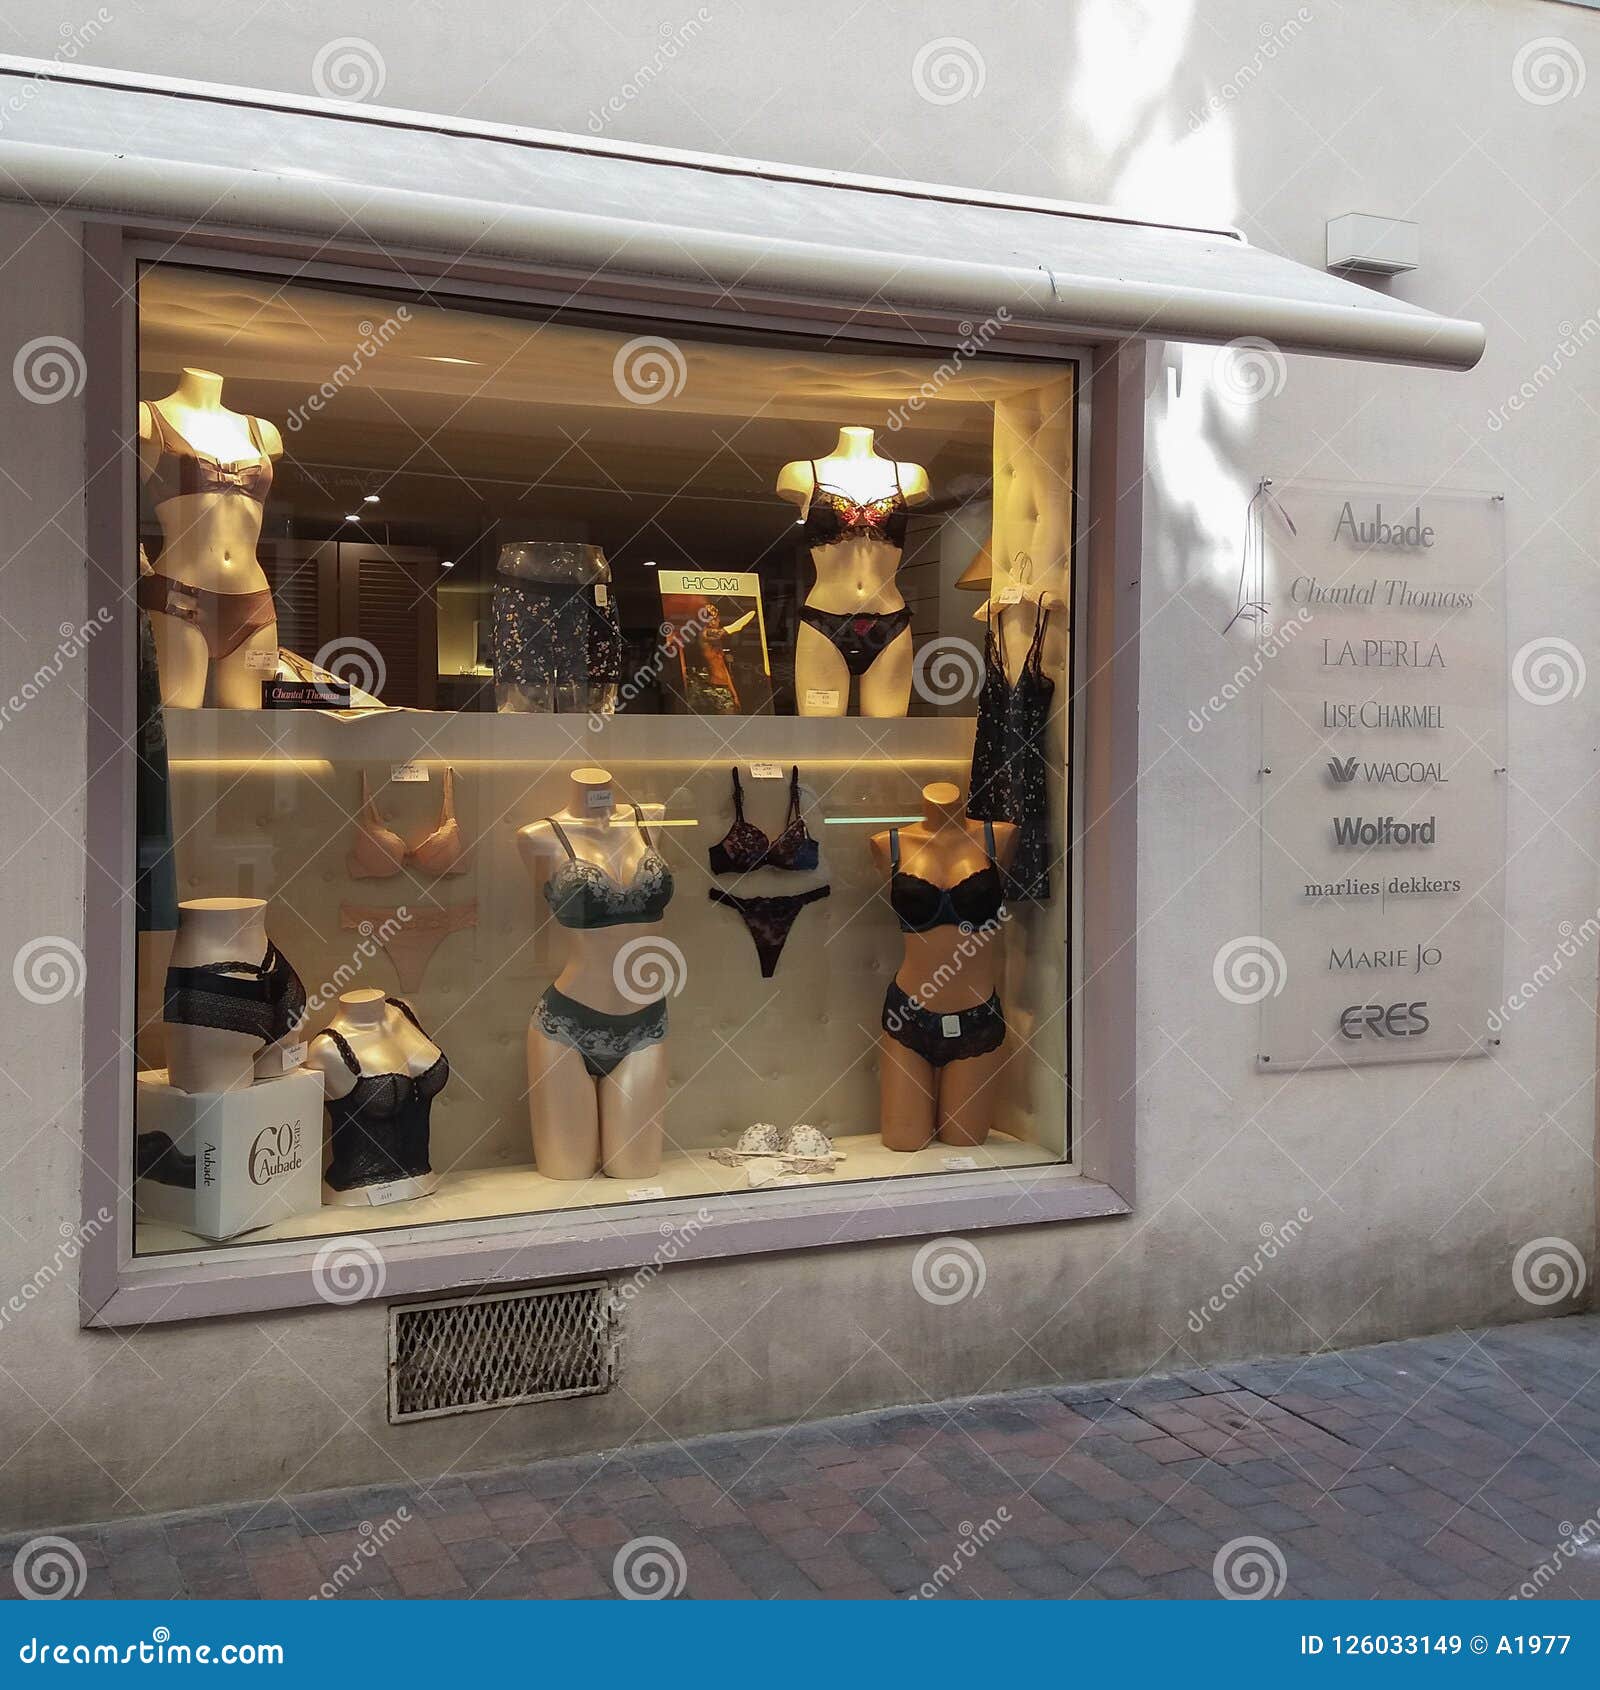 Lingerie Store Window Displaying Luxury Items Editorial Image ...